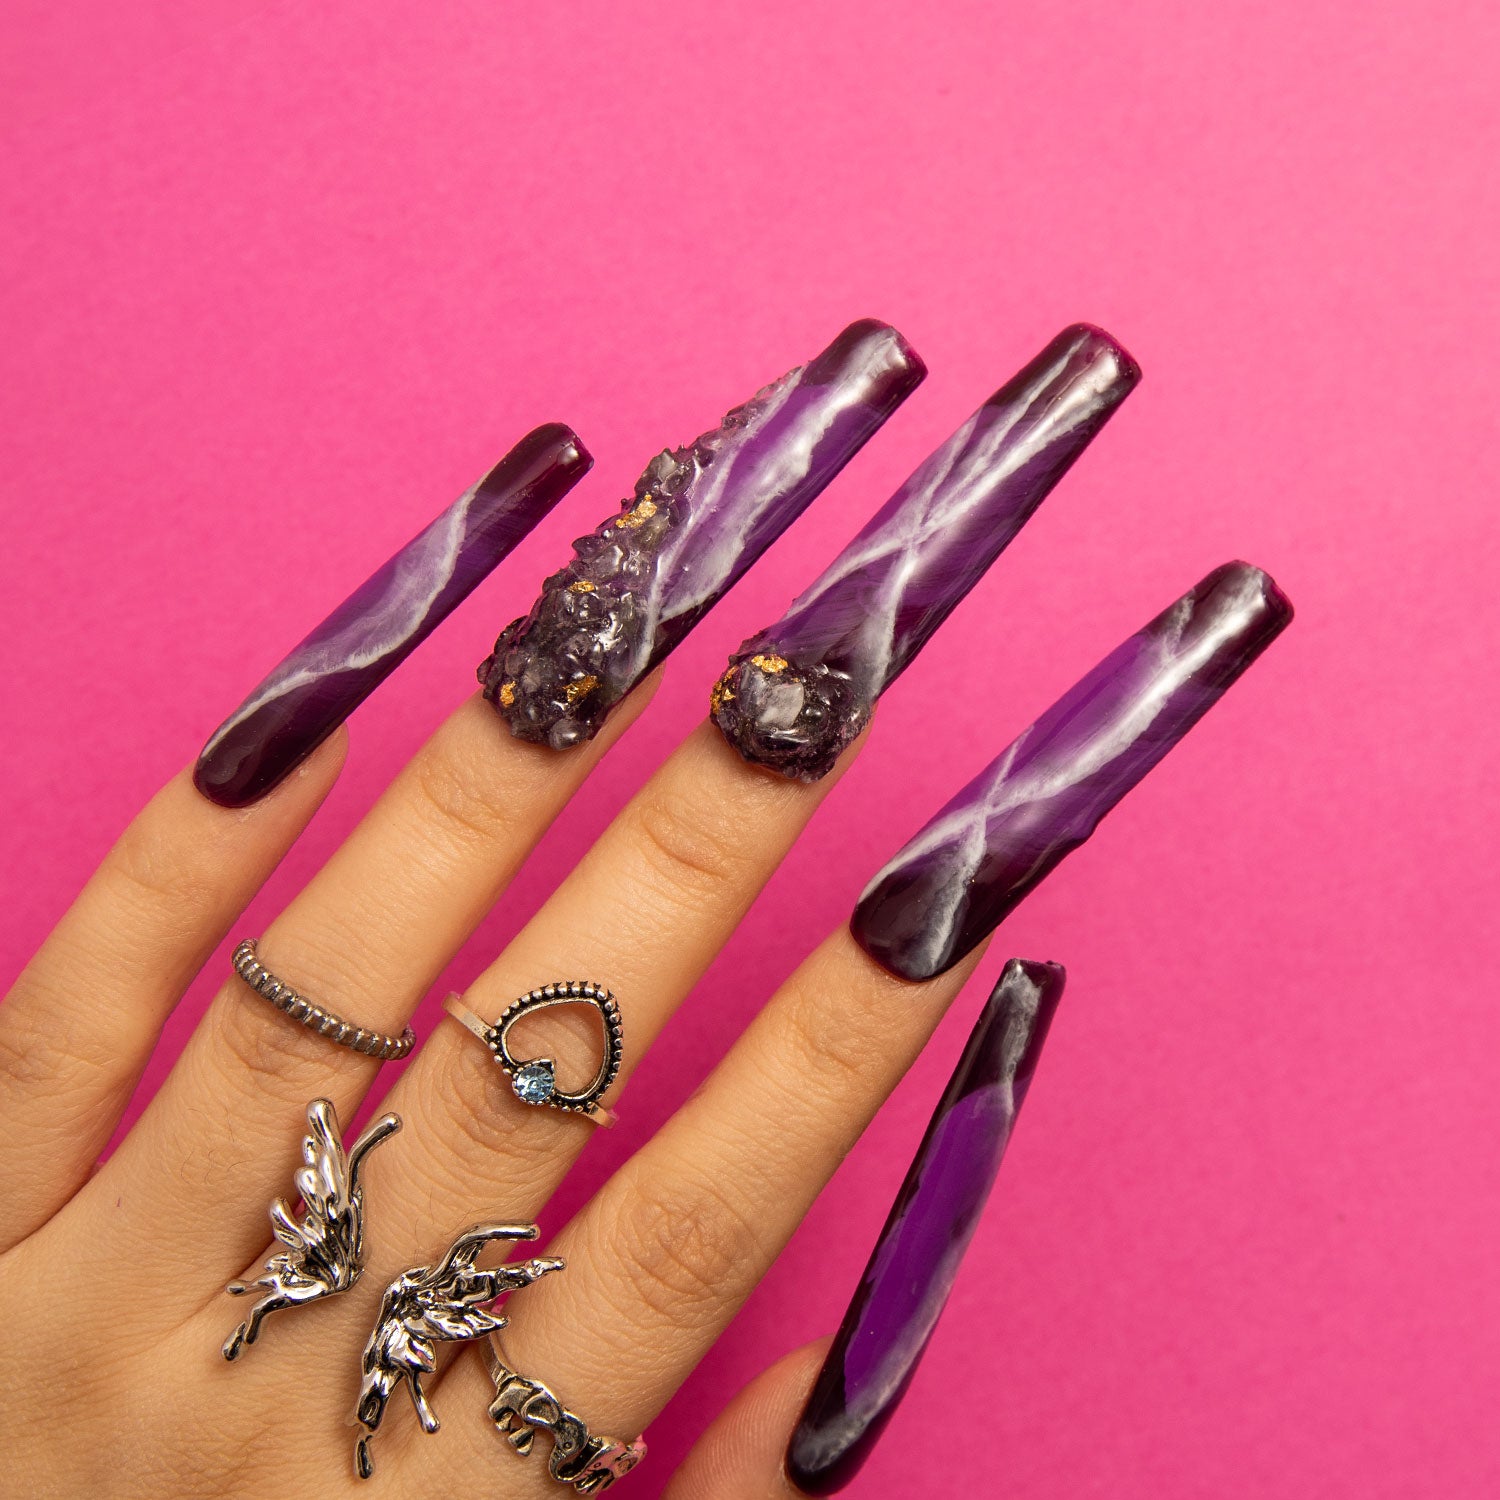 Hand showcasing Dream Amethyst press-on square nails with intricate purple designs and amethyst-like embellishments, accessorized with silver rings, on a pink background.